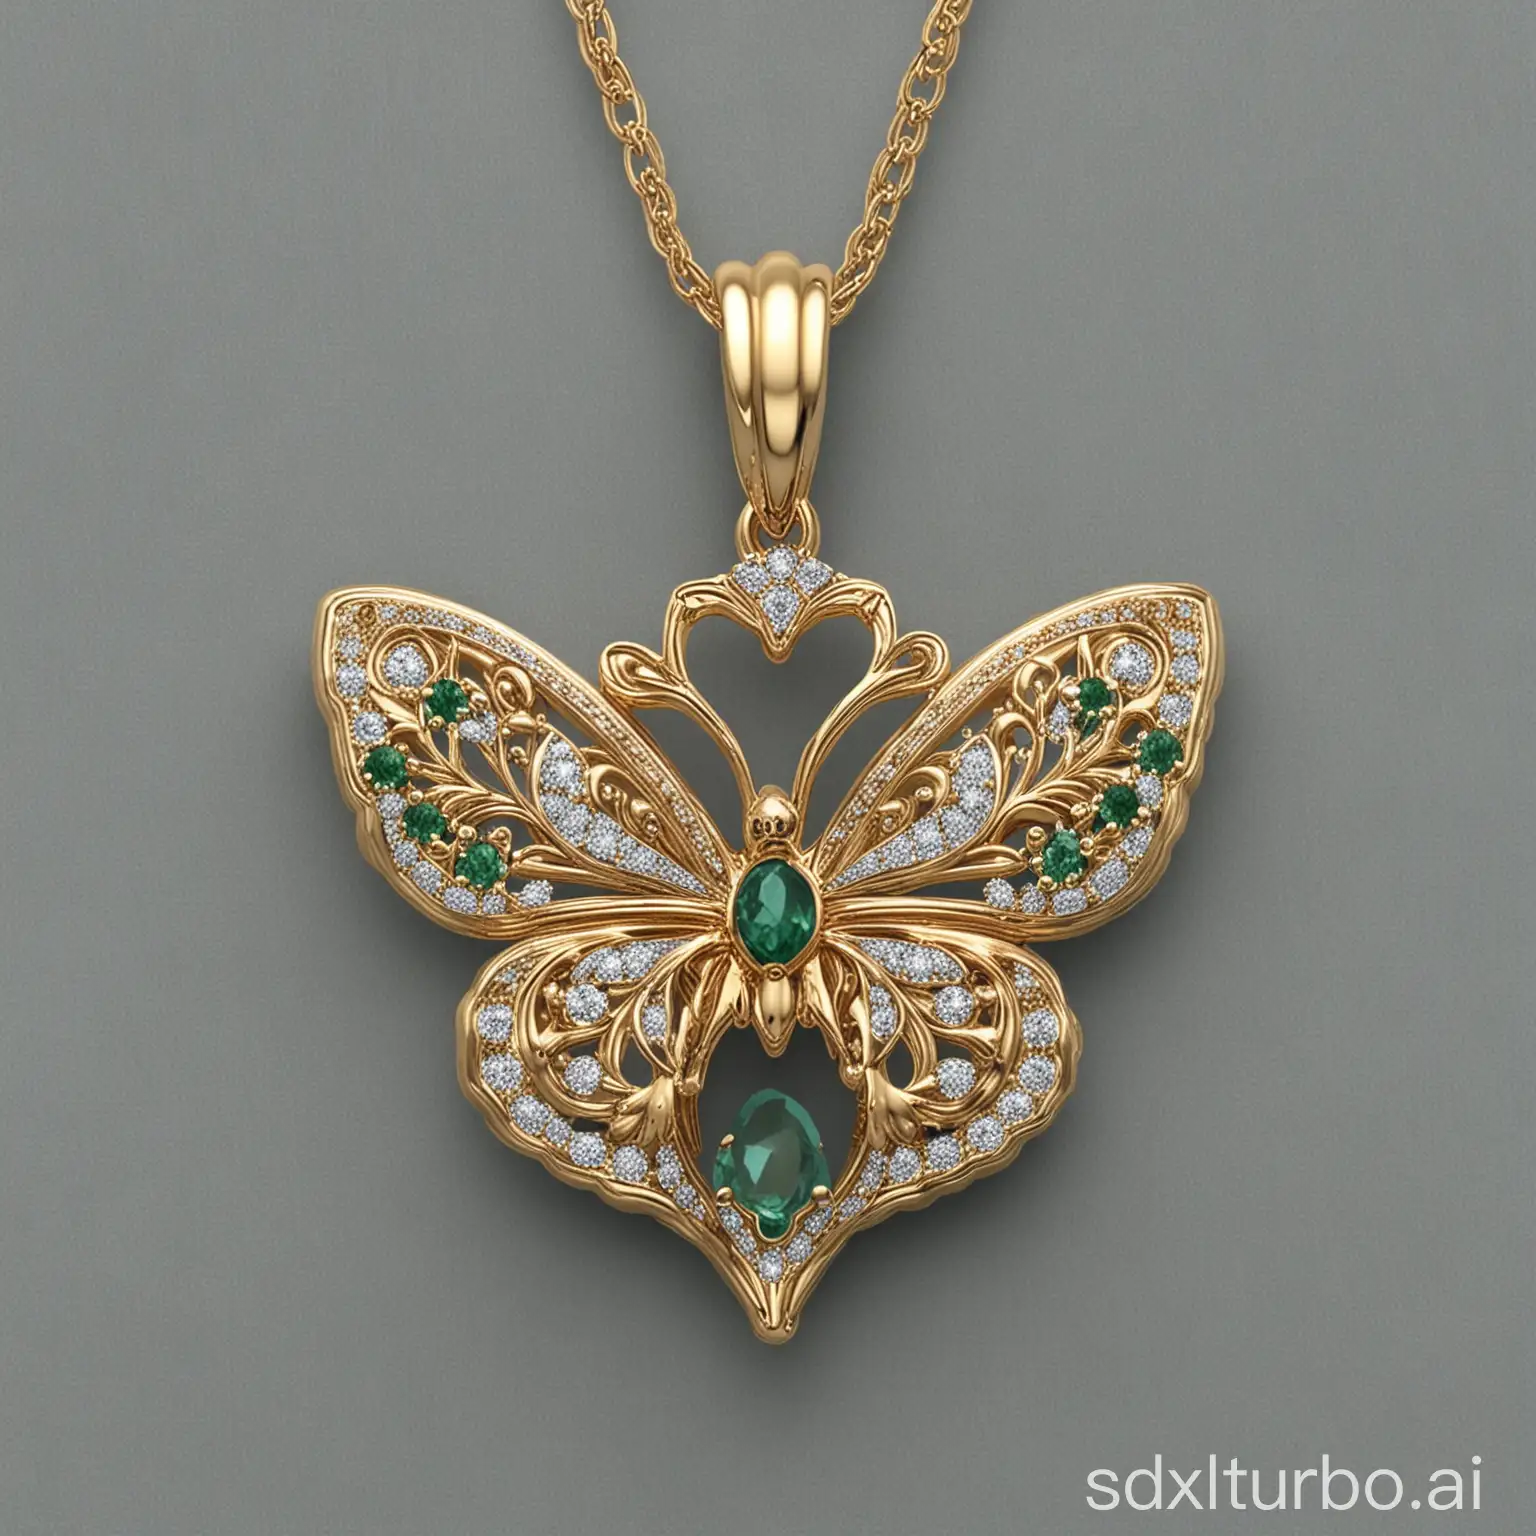 Design a gold pendant featuring a combination of small diamonds and emeralds set in a bezel-encased gemstone surrounded by intricate details. The design should be inspired by nature, specifically a butterfly, with delicate wings and body features that evoke a sense of elegance and whimsy.